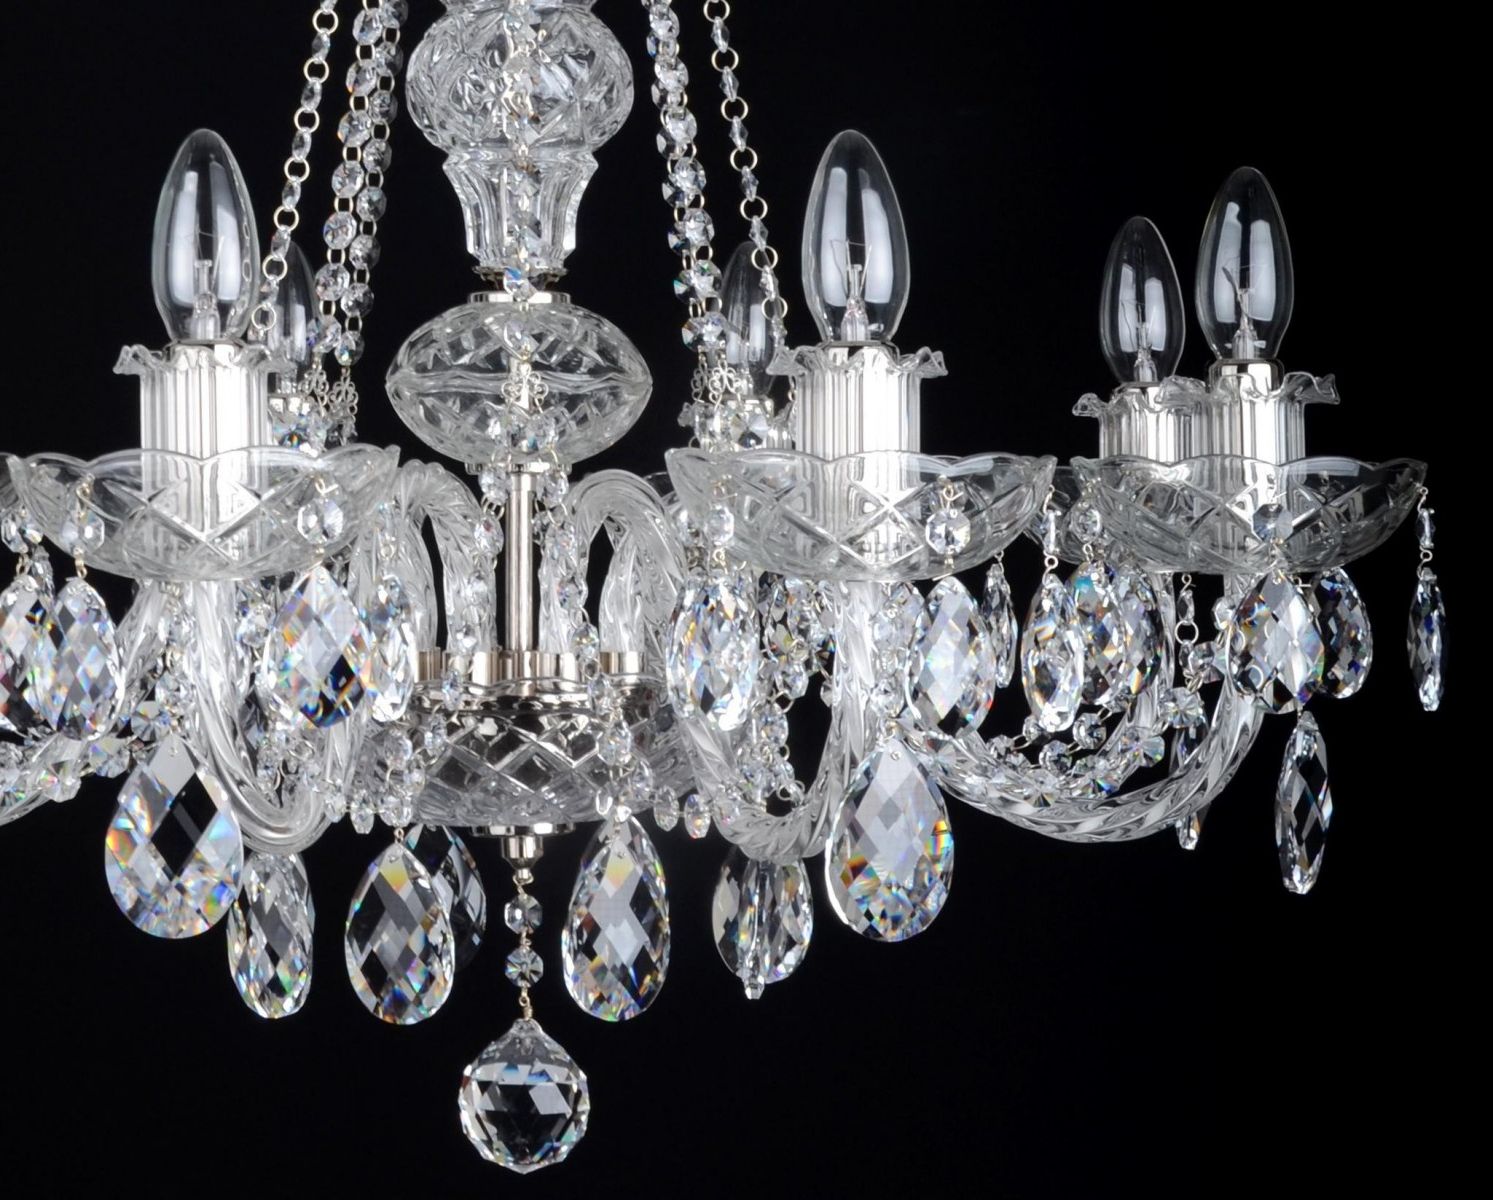 Soft Silver Crystal Chandeliers Within Most Up To Date 8 Arms Silver Swarovski Crystal Chandelier Decorated With (View 18 of 20)